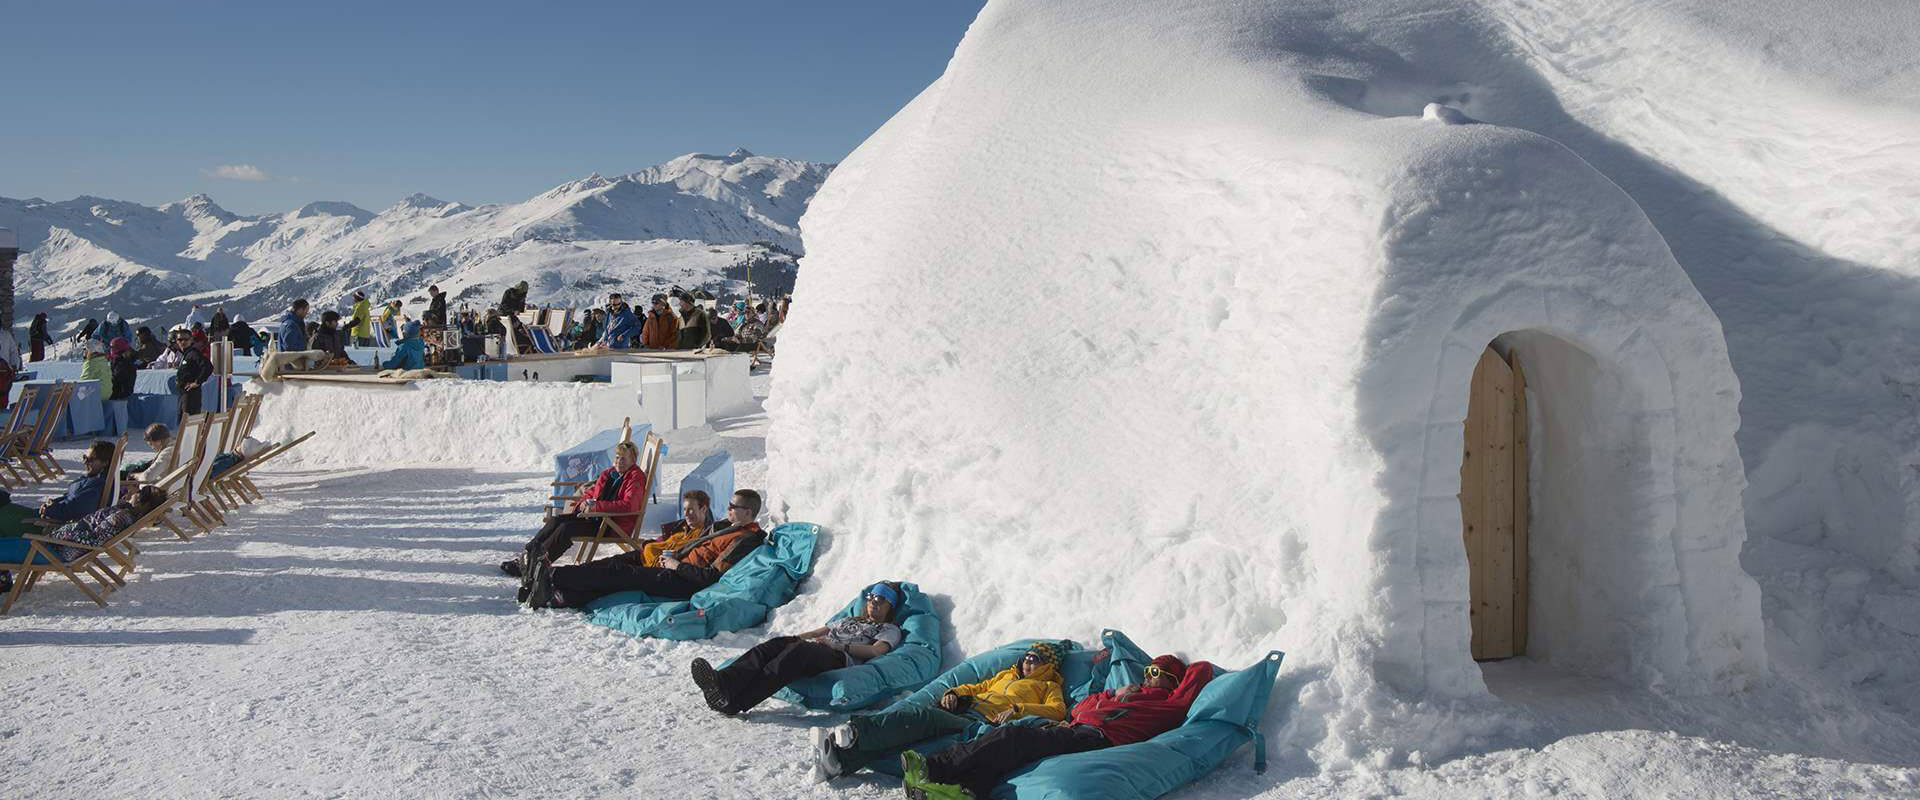 skiers relax in the sun in mayrhofen